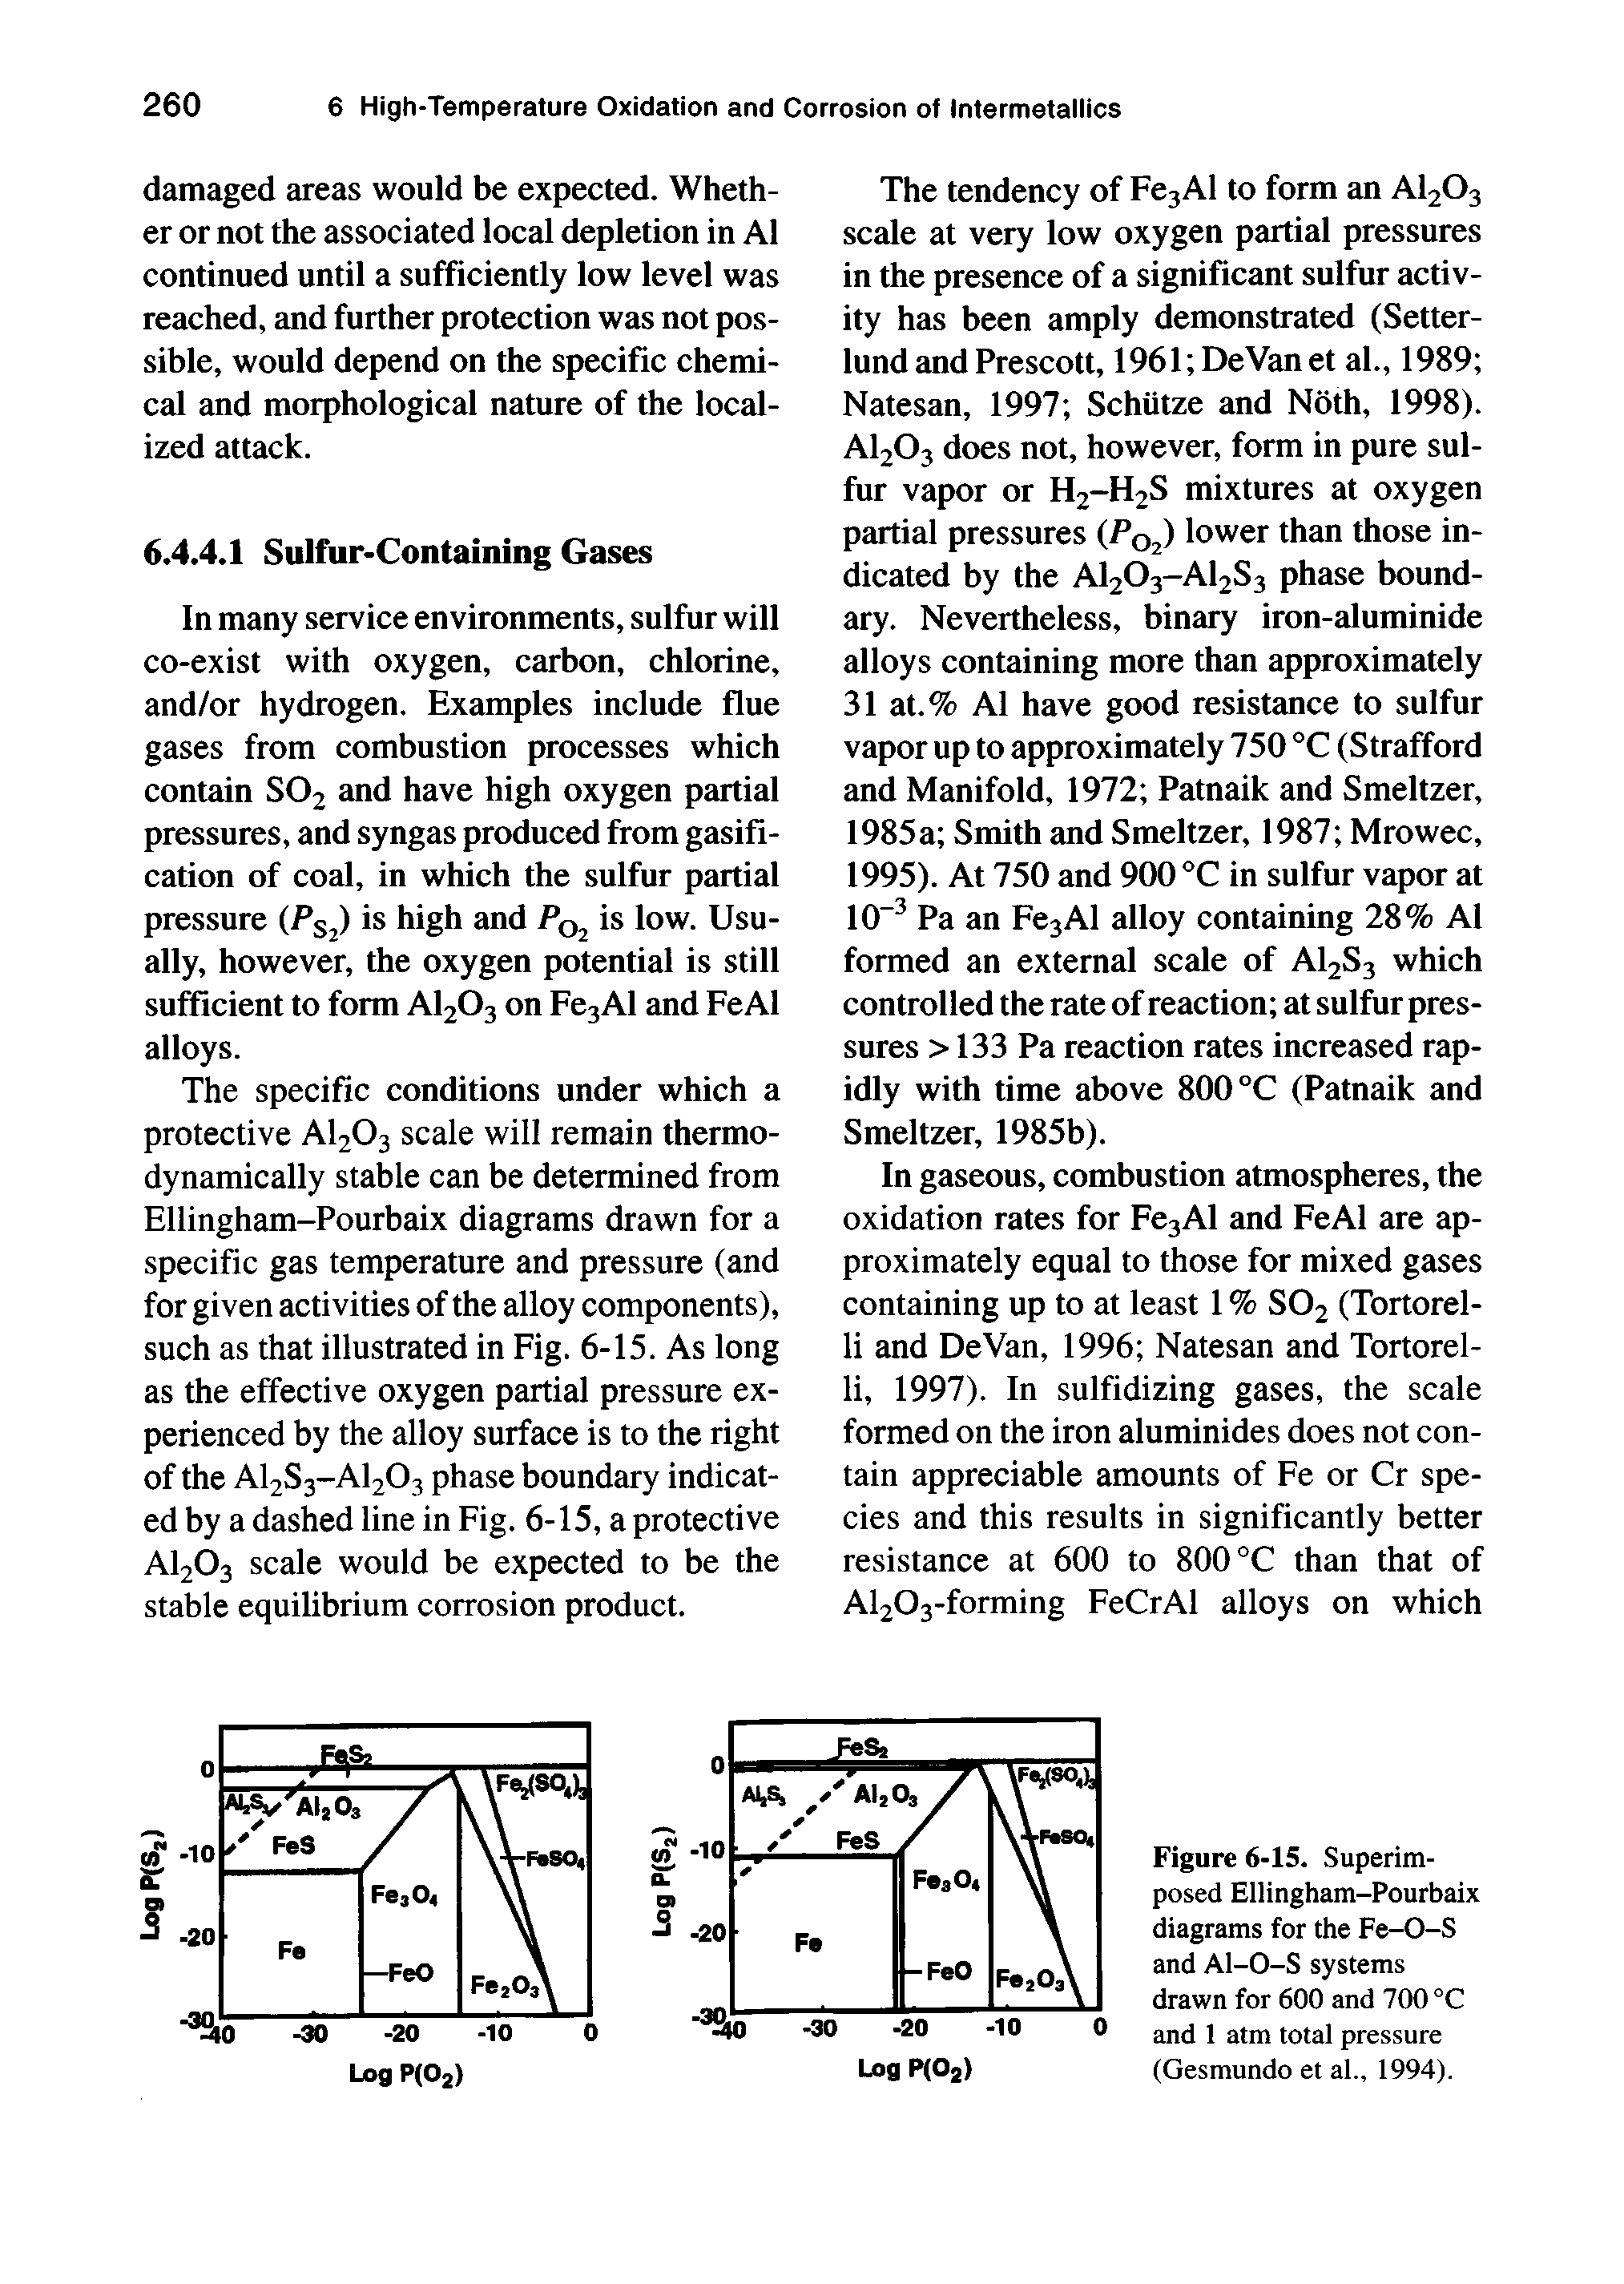 Figure 6-15. Superimposed Ellingham-Pourbaix diagrams for the Fe-O-S and Al-O-S systems drawn for 600 and 700 °C and 1 atm total pressure (Gesmundo et al., 1994).